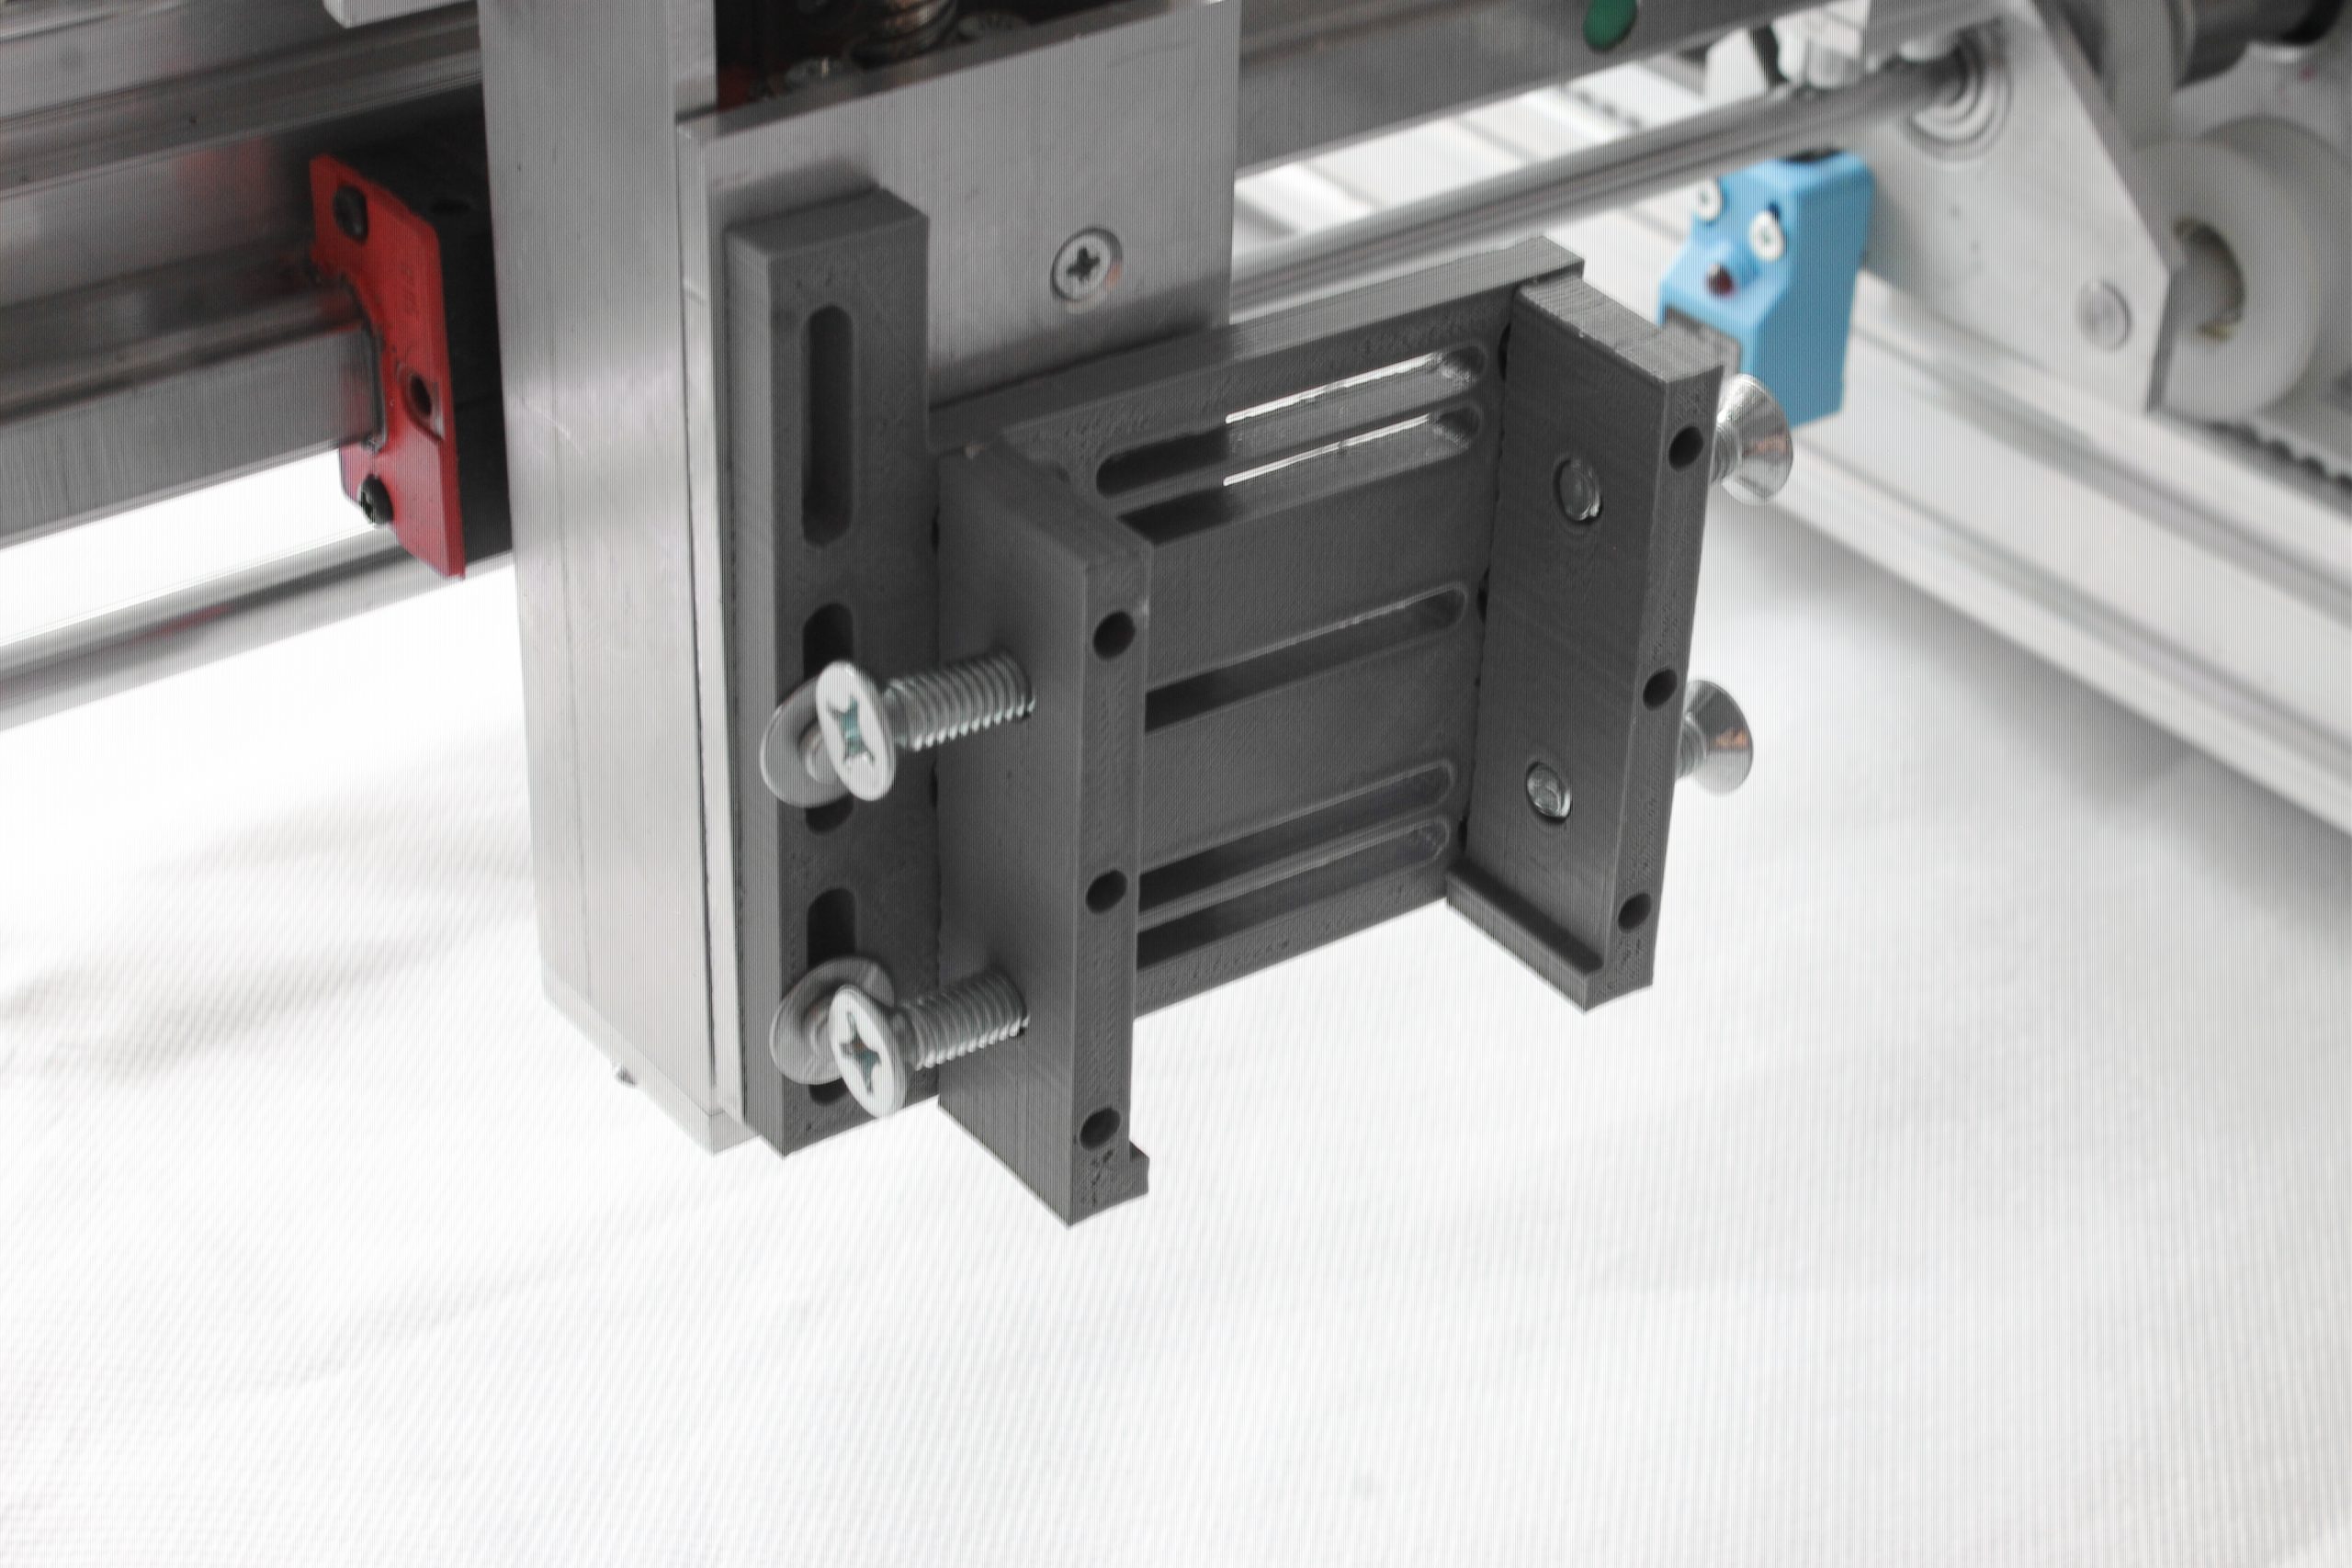 An Advanced mounting bracket for your laser (3D Printed version)